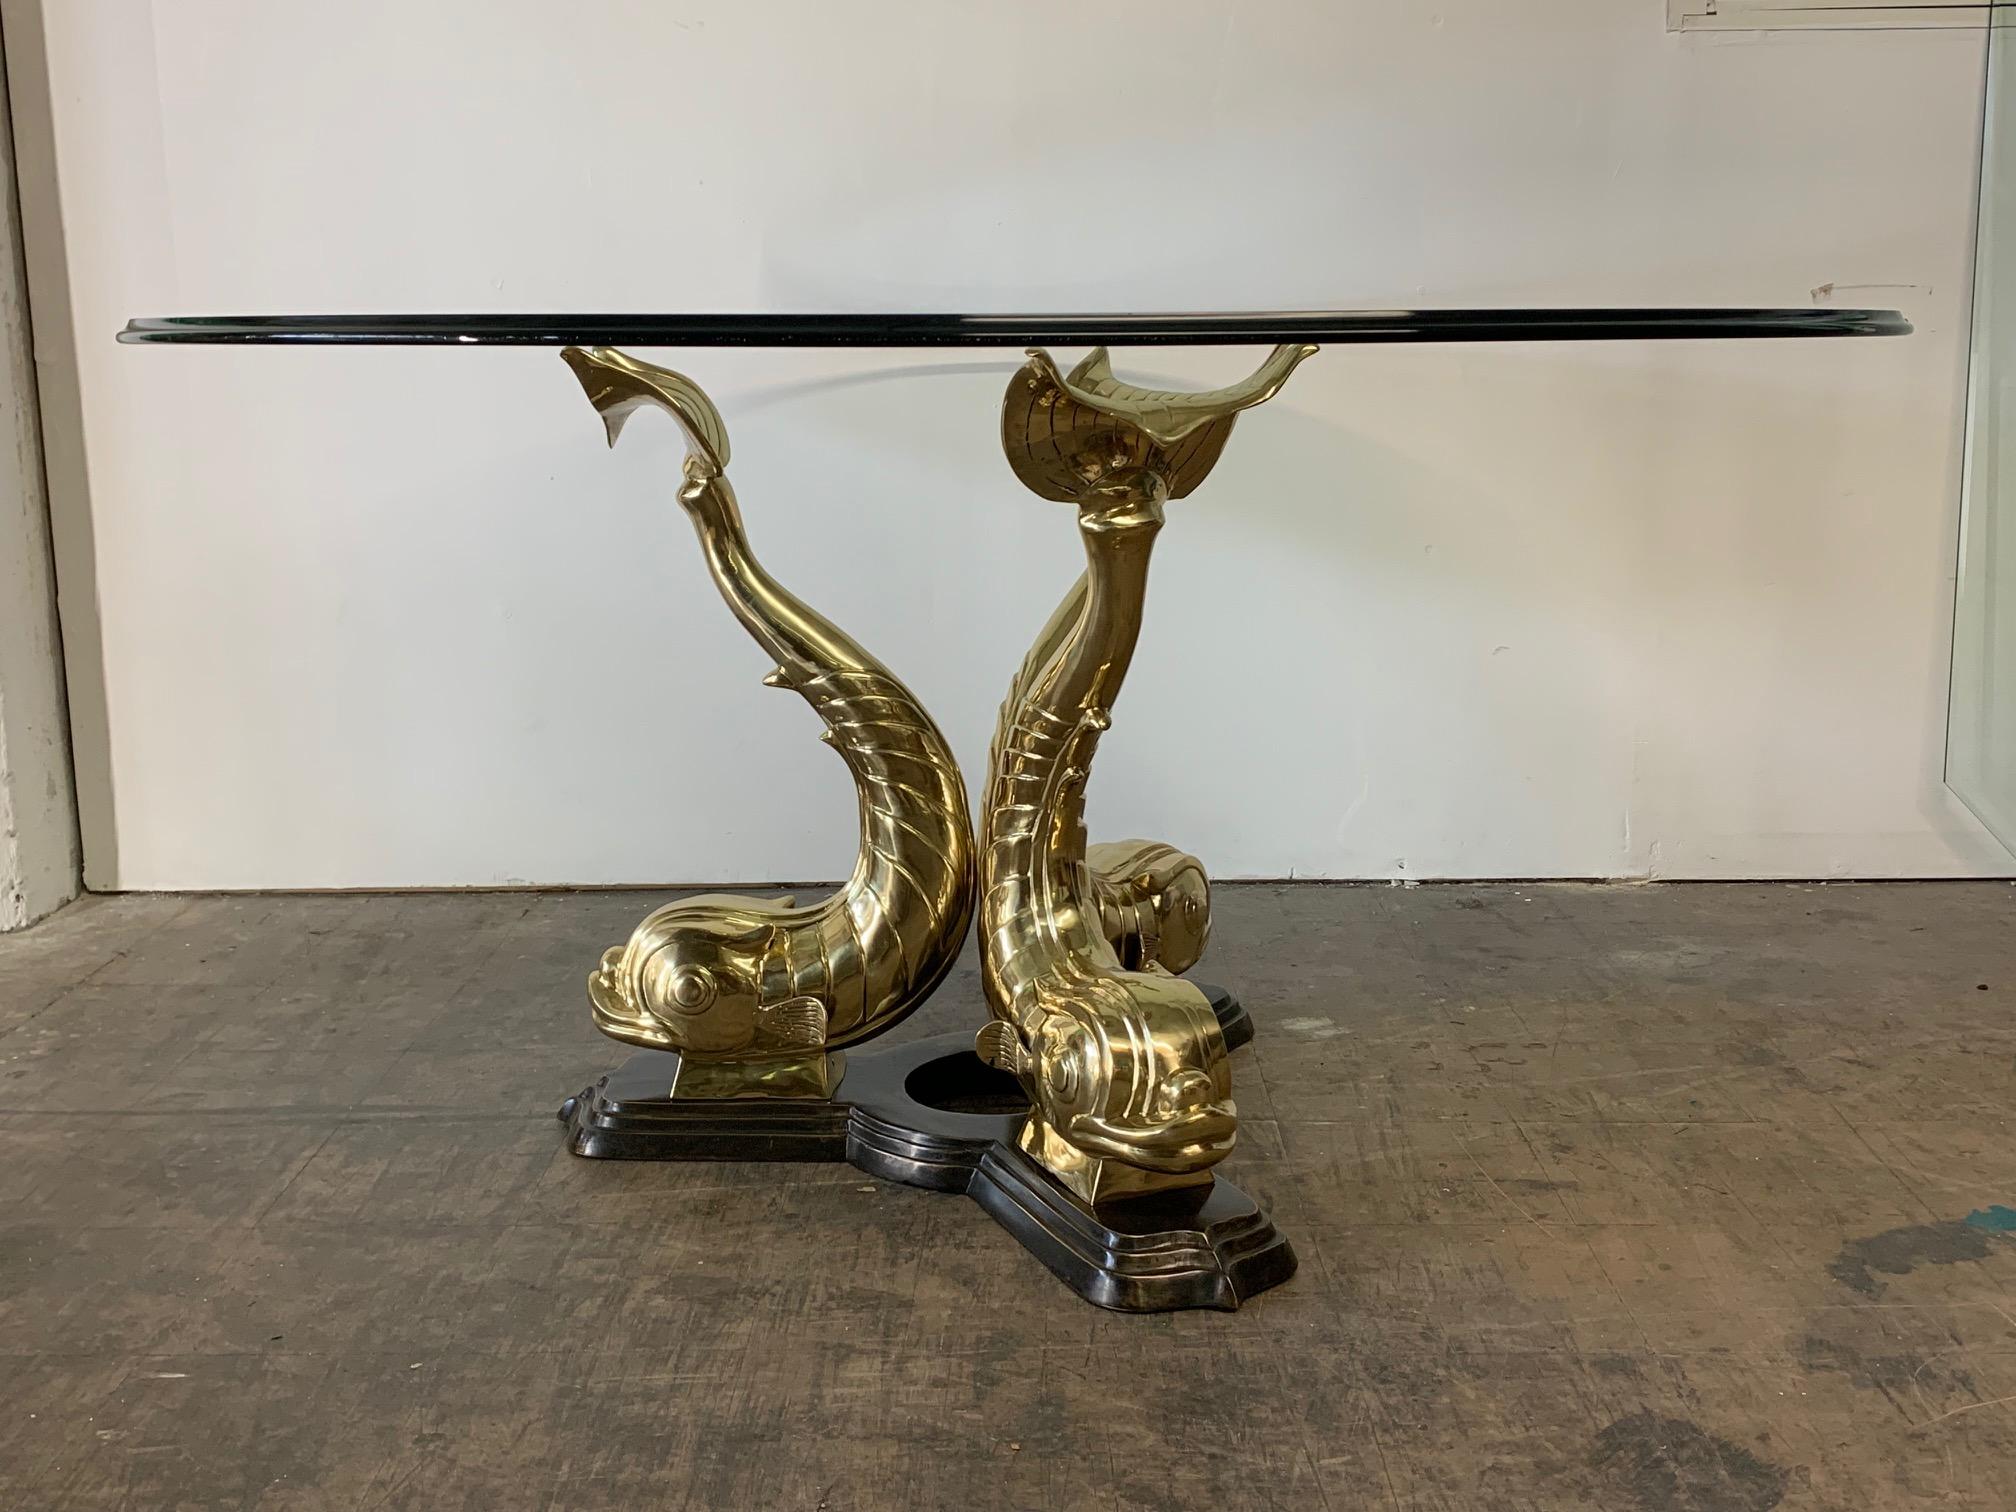 Freshly restored brass Asian dolphin pedestal dining table features three majestic fish (also considered Koi) mounted on a bronze base with a thick 60